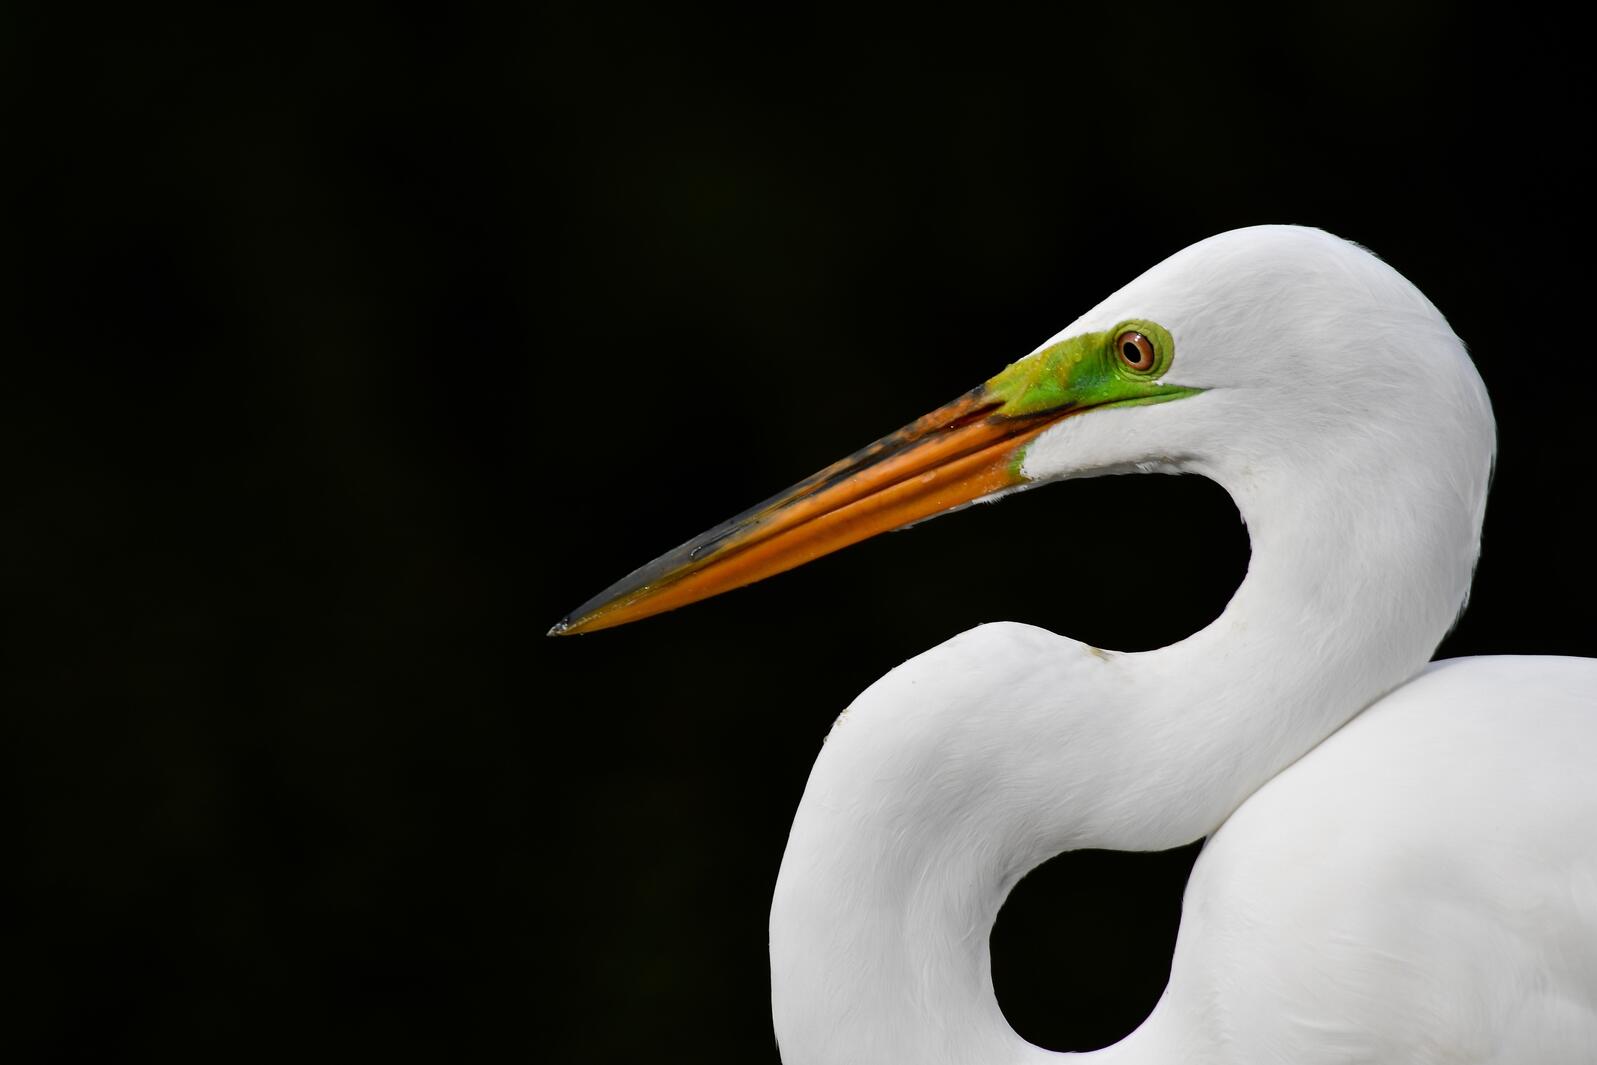 Close-up photo of a white wading bird against a dark background